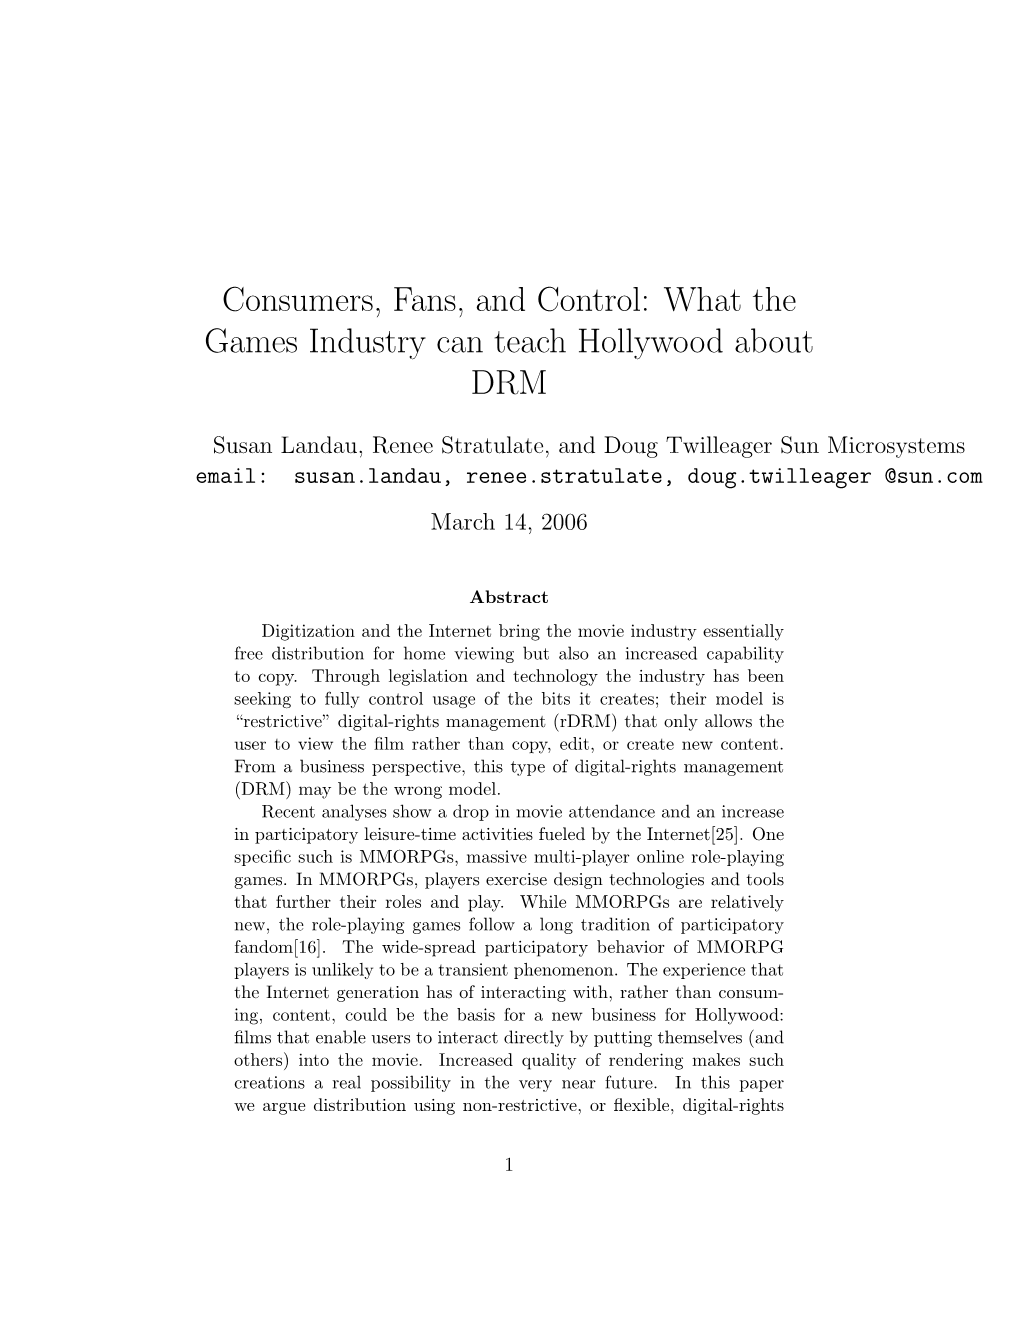 What the Games Industry Can Teach Hollywood About DRM